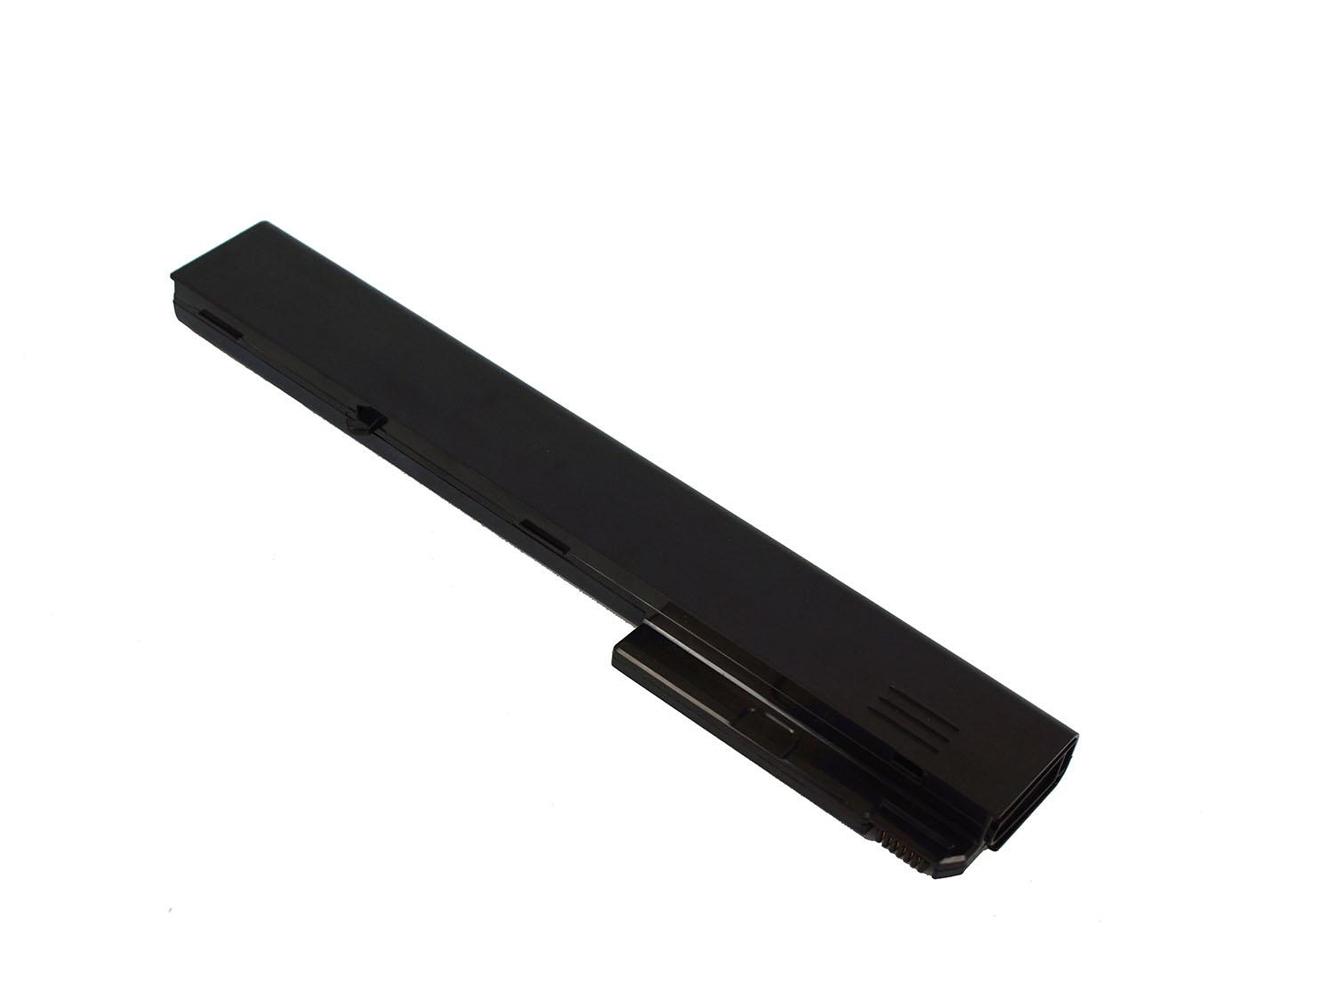 361909-001, 361909-002 replacement Laptop Battery for Hp Compaq Business Notebook 8510p, Business Notebook 8510w, 4600mAh, 14.40V